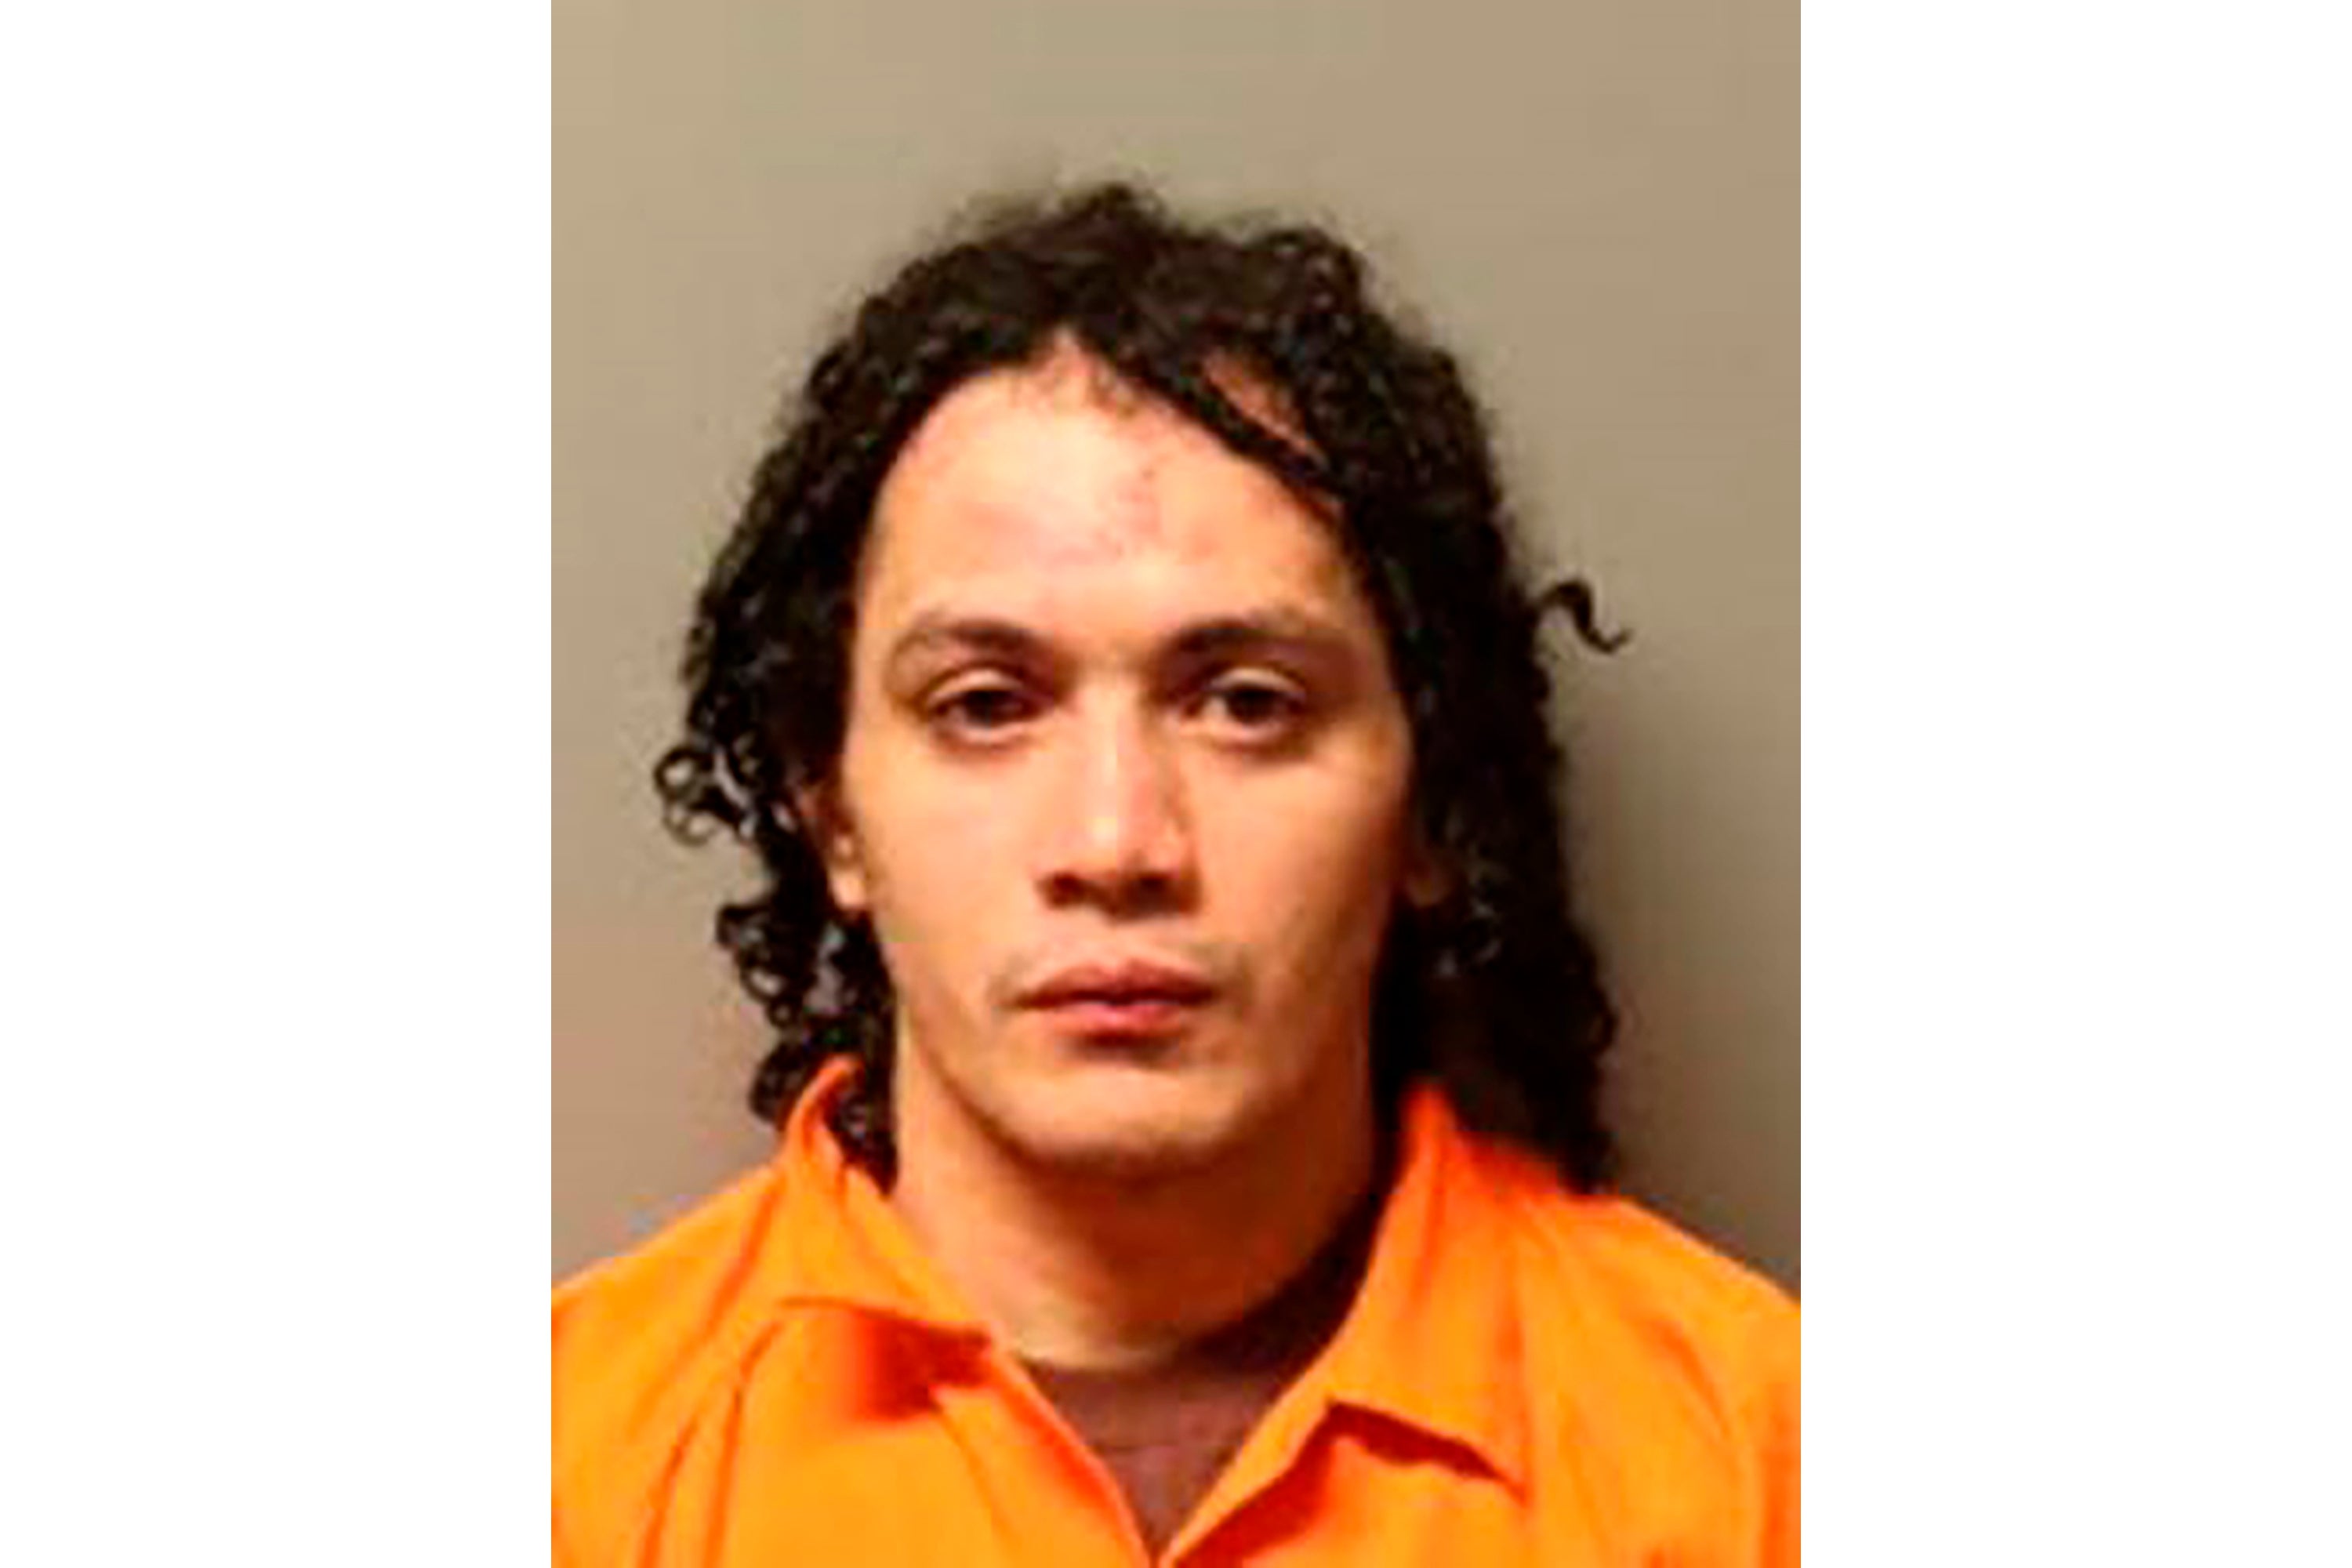 Danelo Cavalcante has been moved to the maximum security State Correctional Institution Phoenix in Montgomery County, where he awaits further trials for crimes he committed during his escape